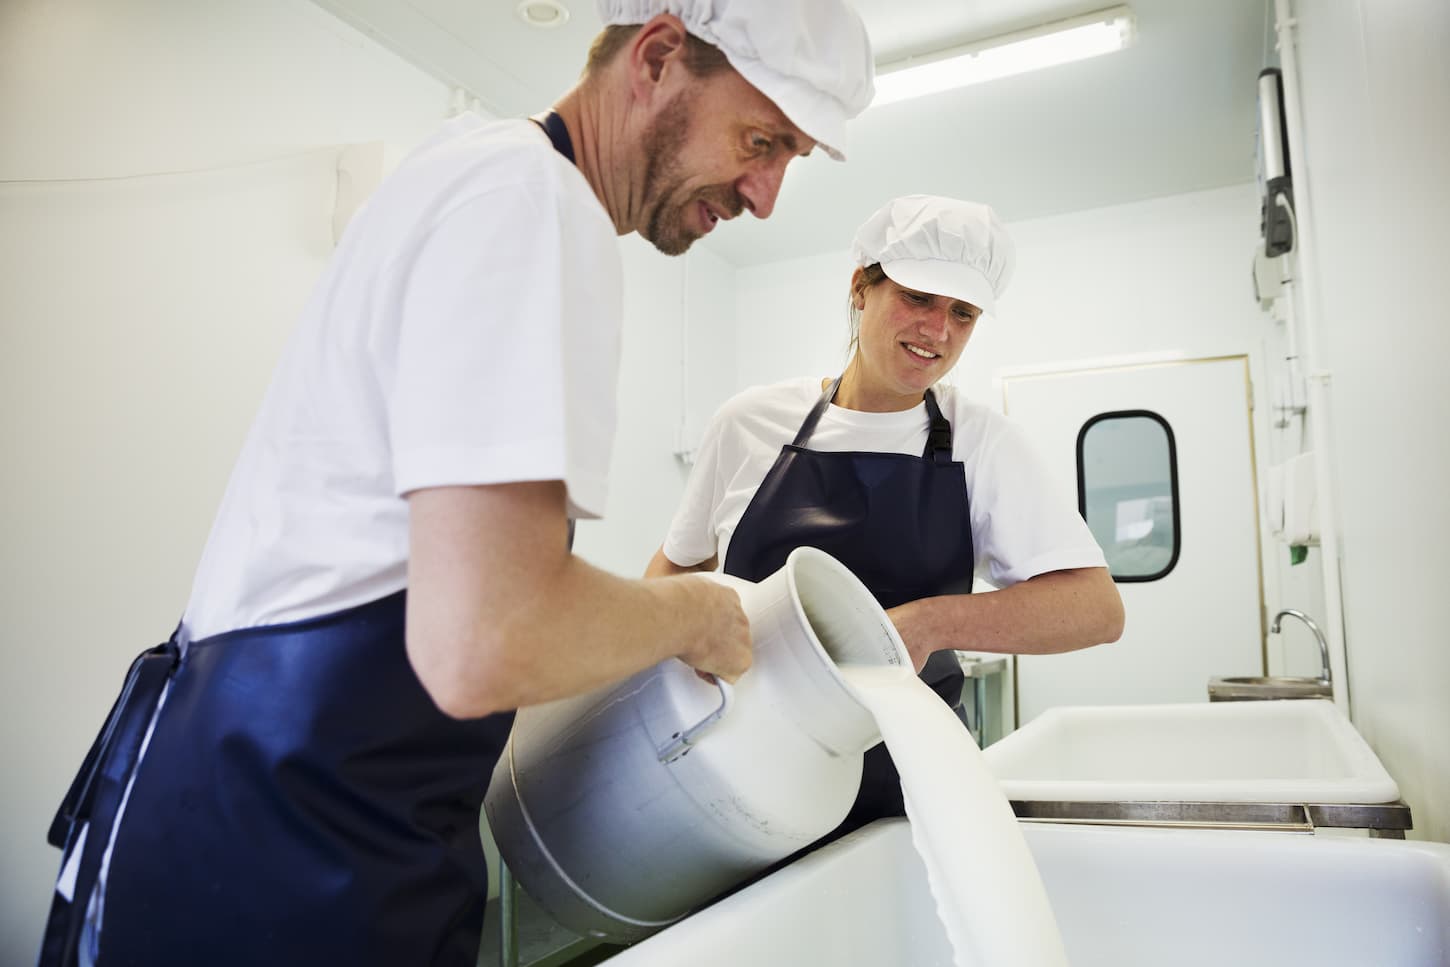 An image of a Man and Woman in a creamery, pouring goat's milk from a churn, making goat cheese.